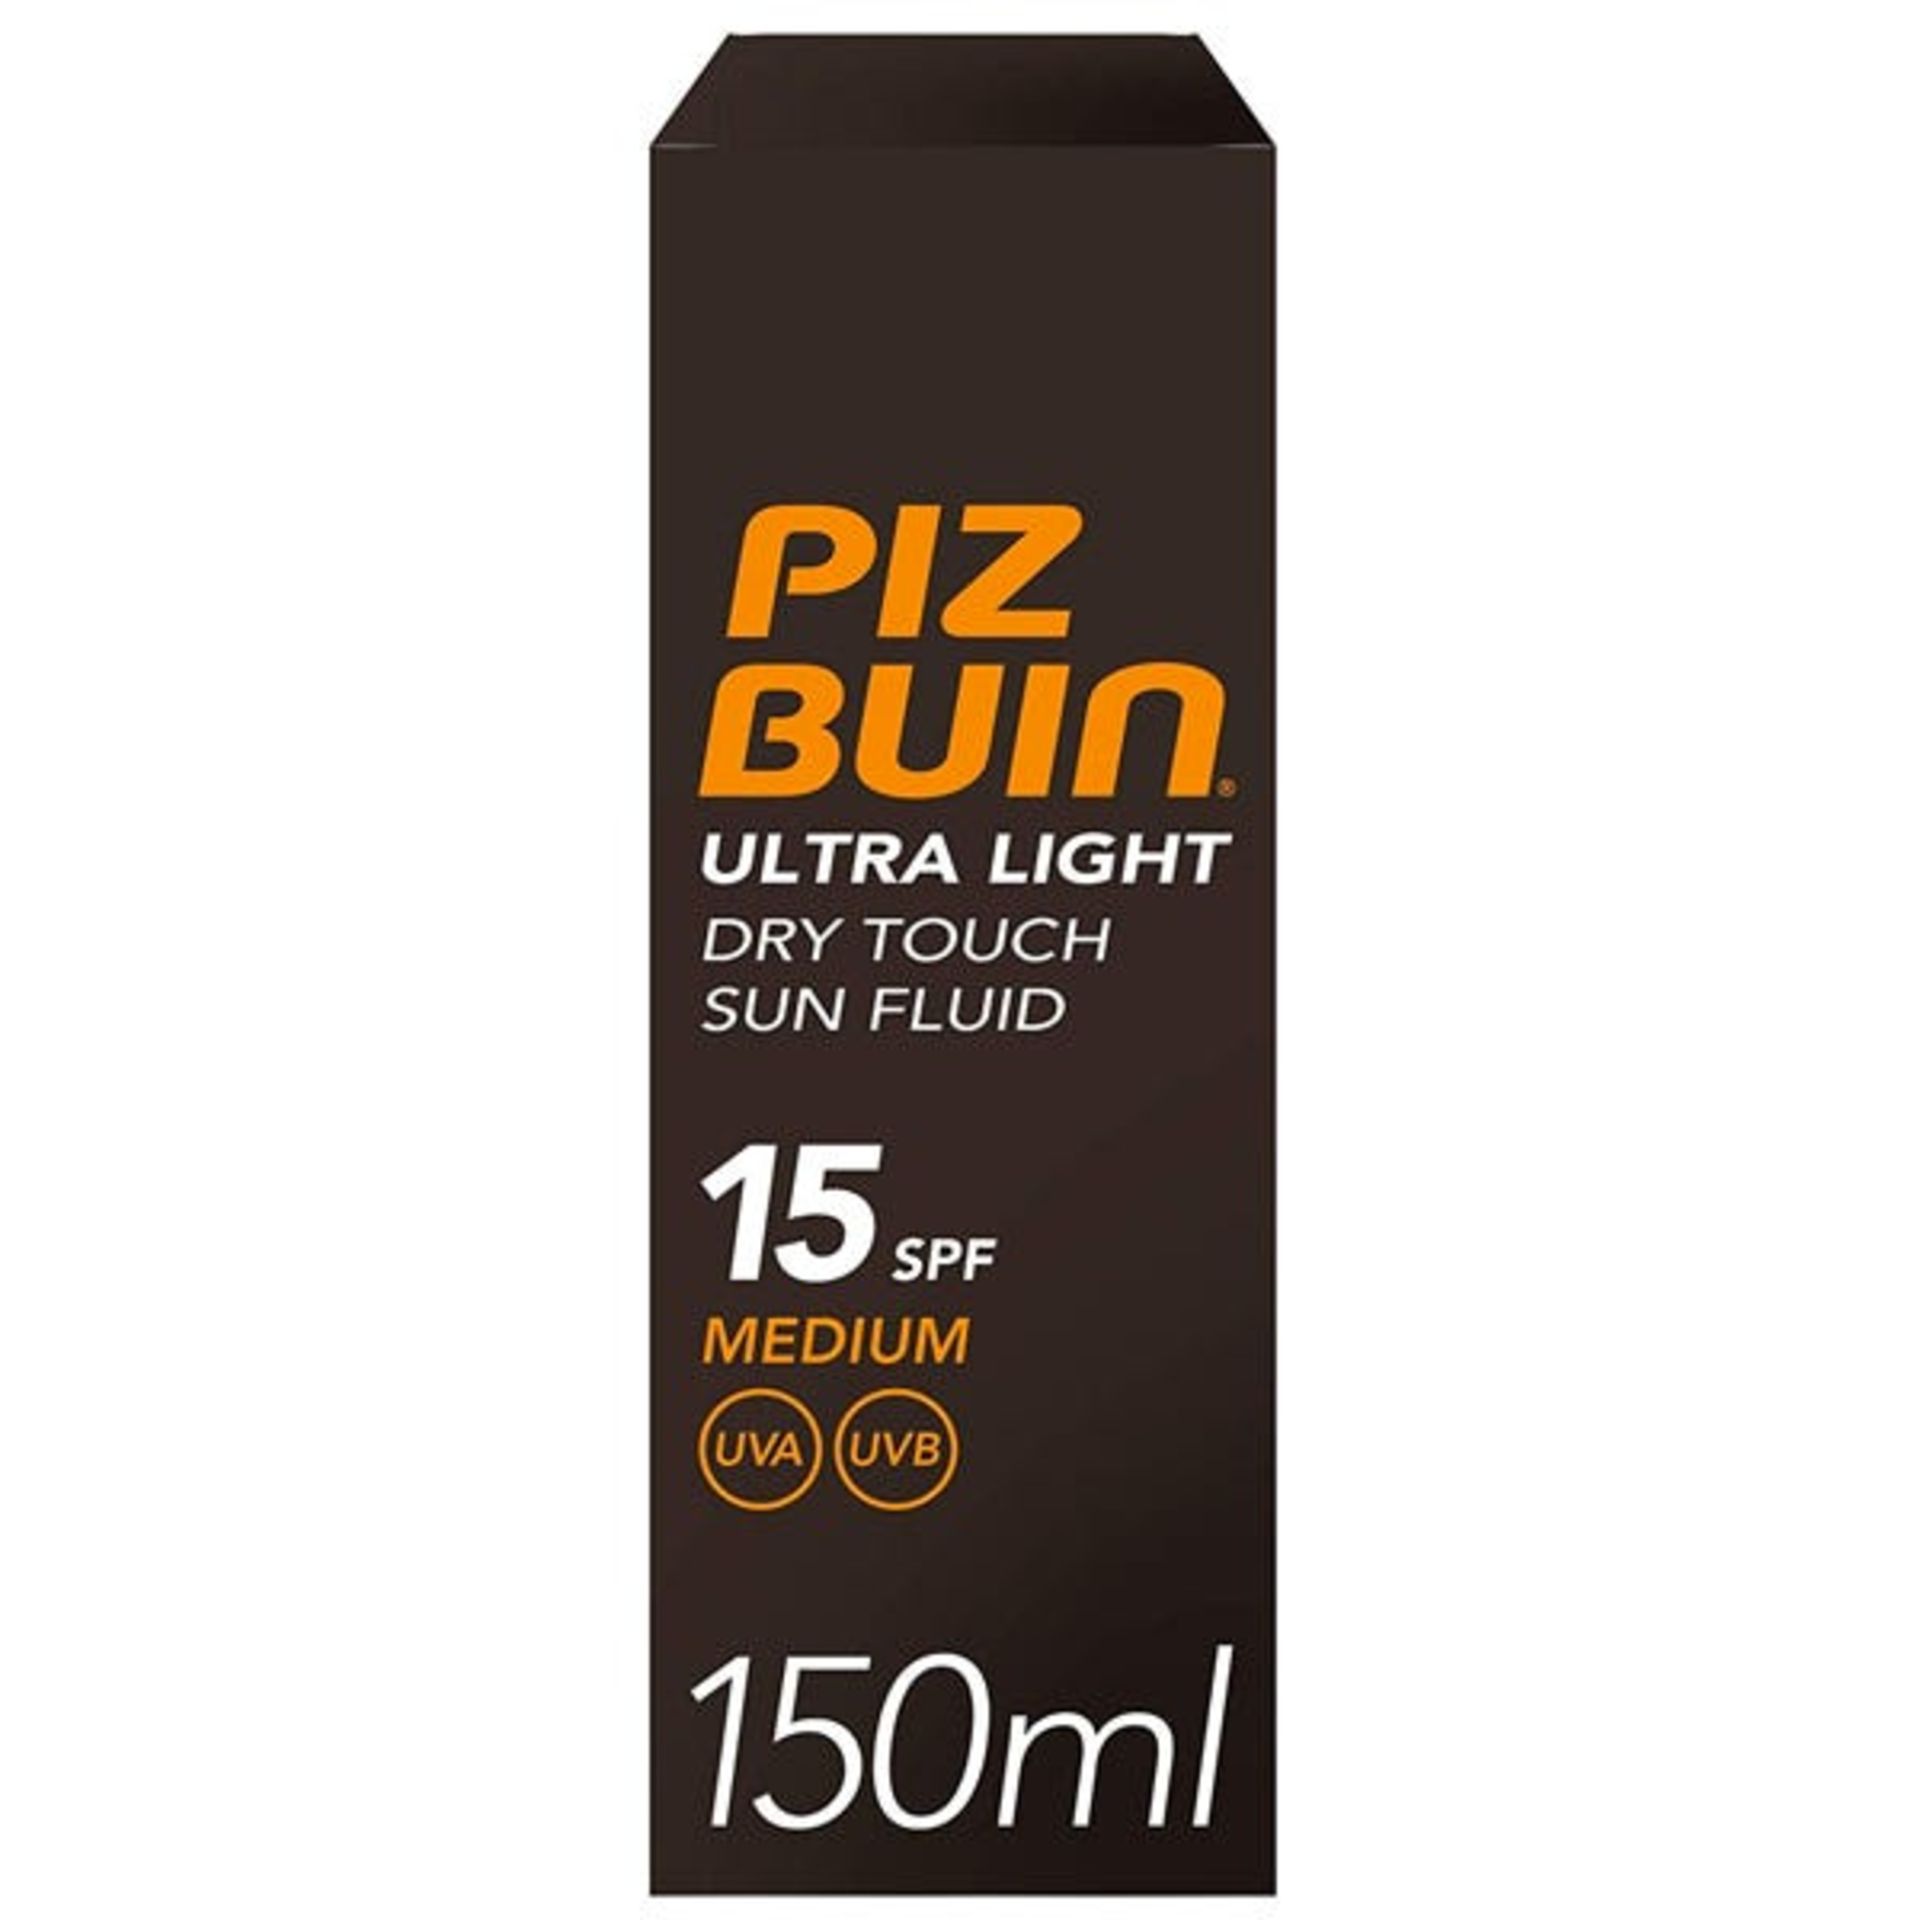 X 3 PLZ BUIN SUN FLUID SPF 15 150 ML RRP £9.99Condition ReportAppraisal Available on Request- All